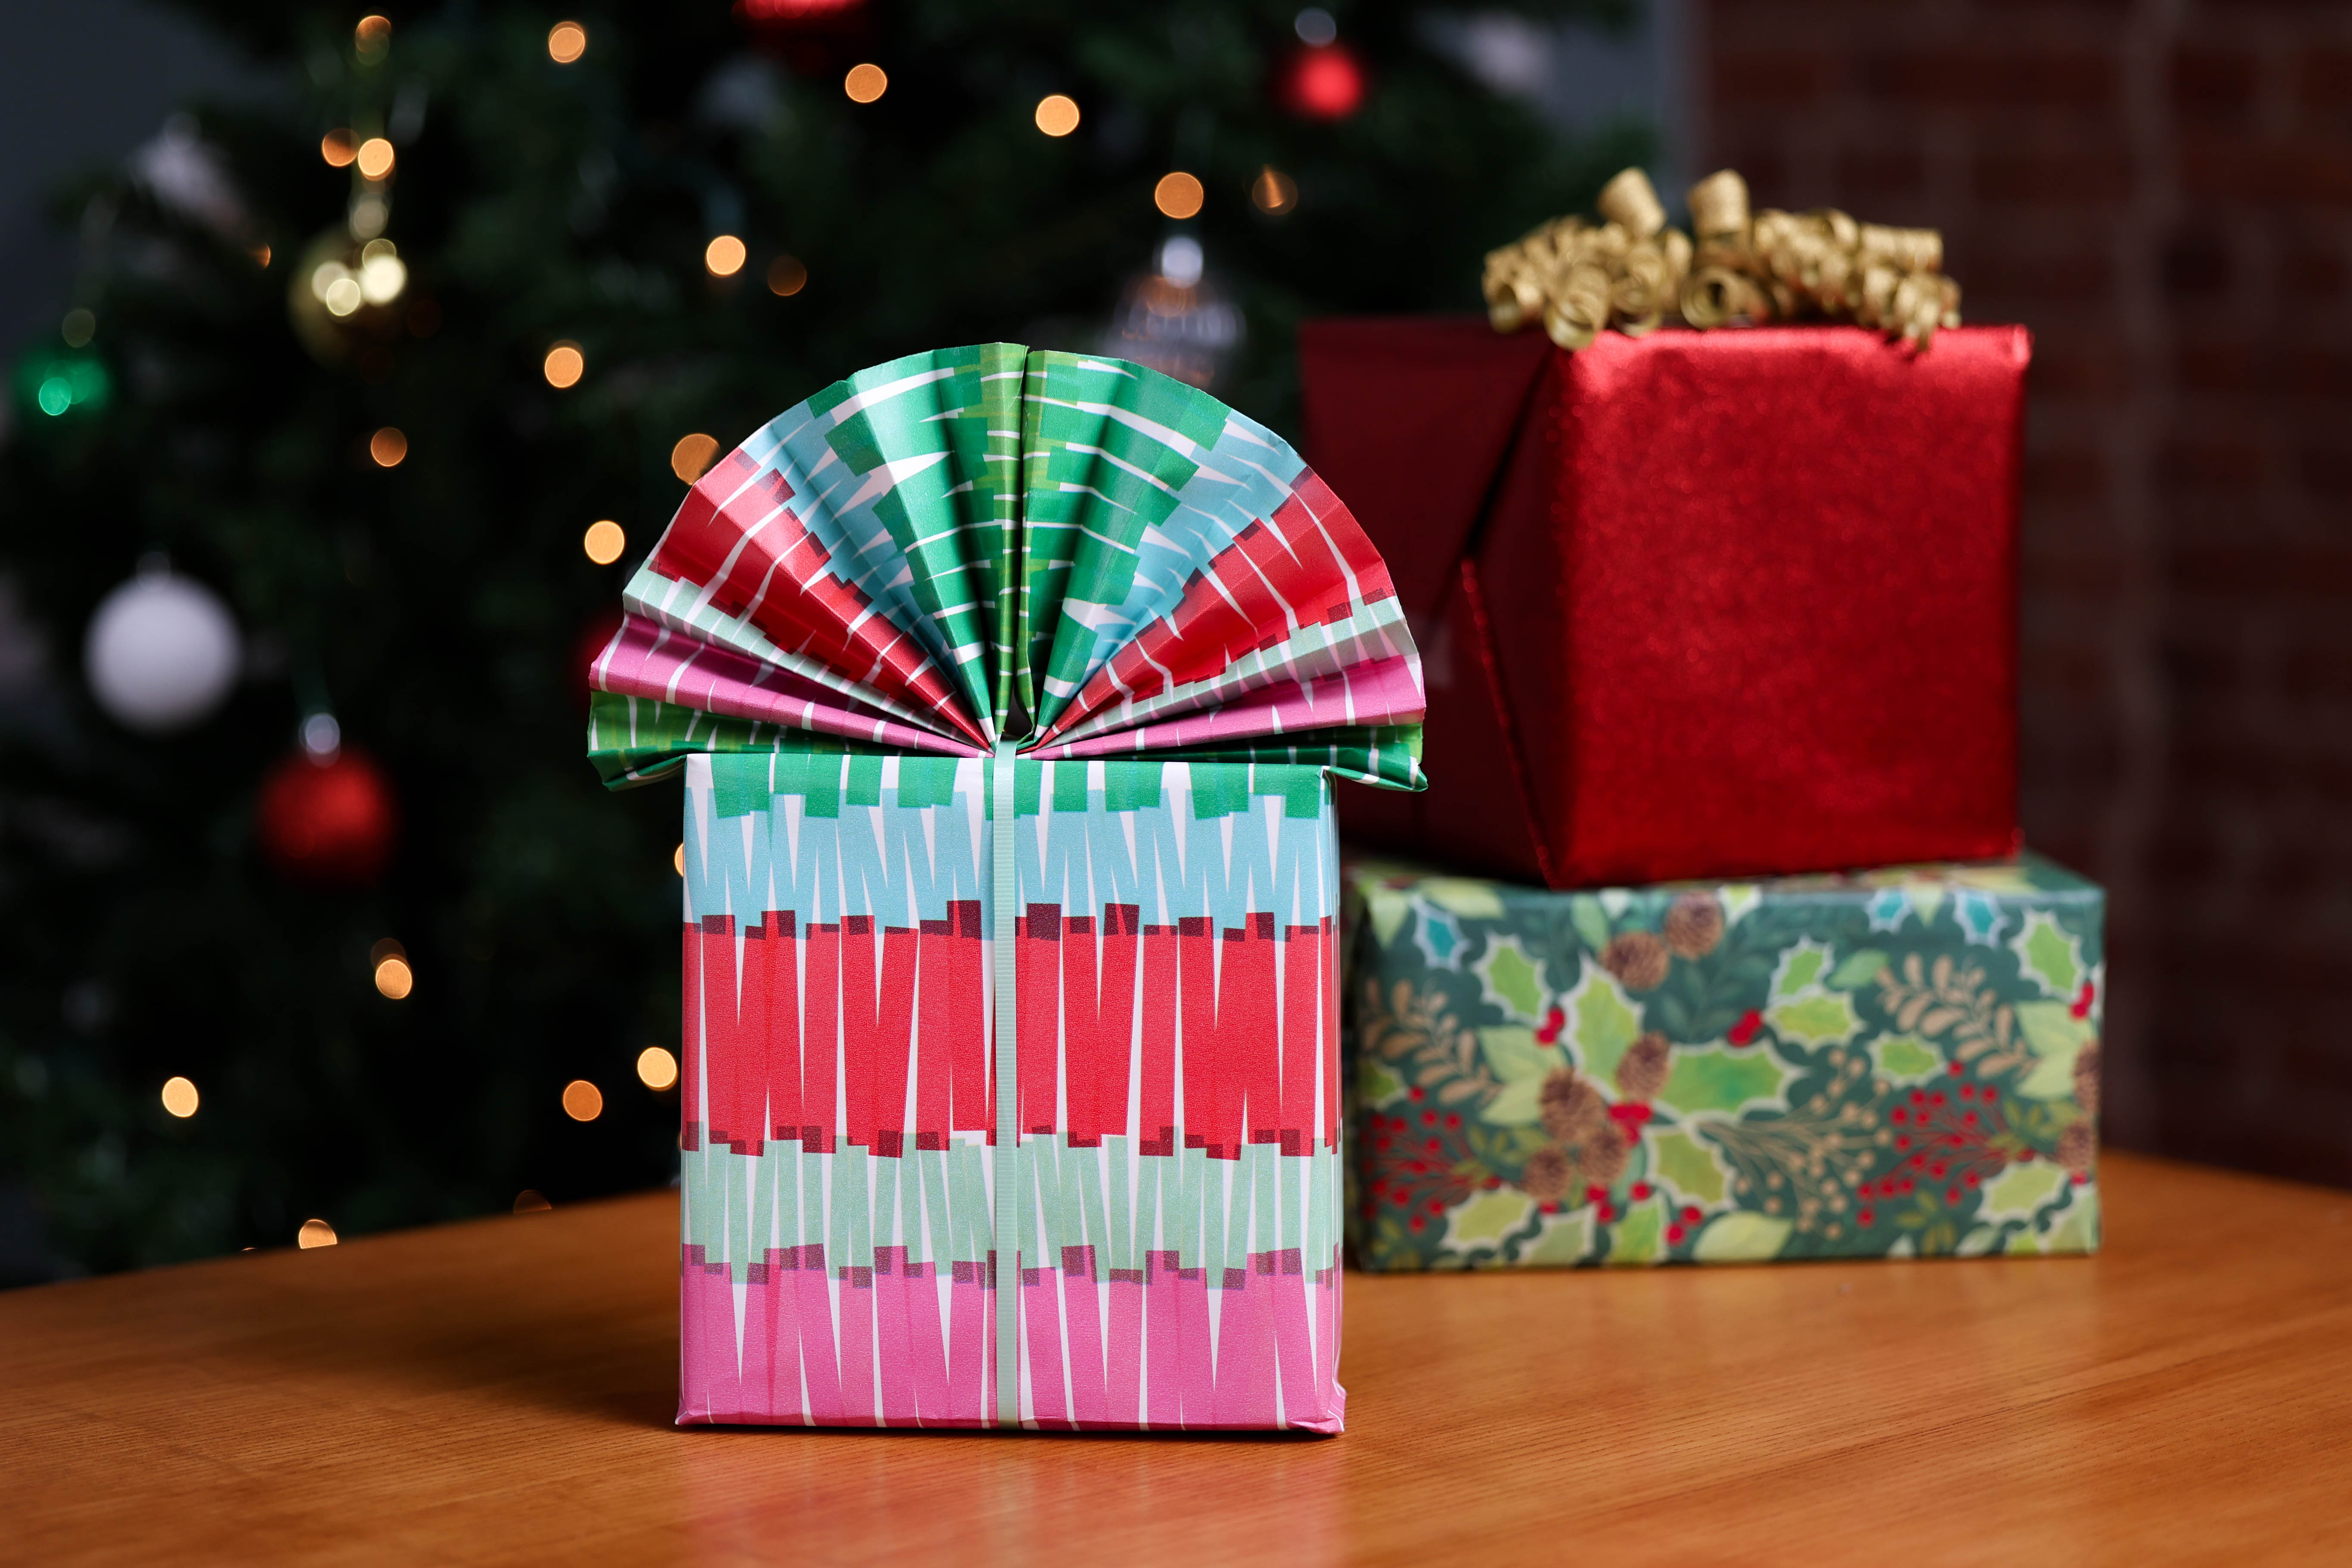 Little ELF—Cutting Wrapping Paper Made Easy and Fun by Bryan Perla